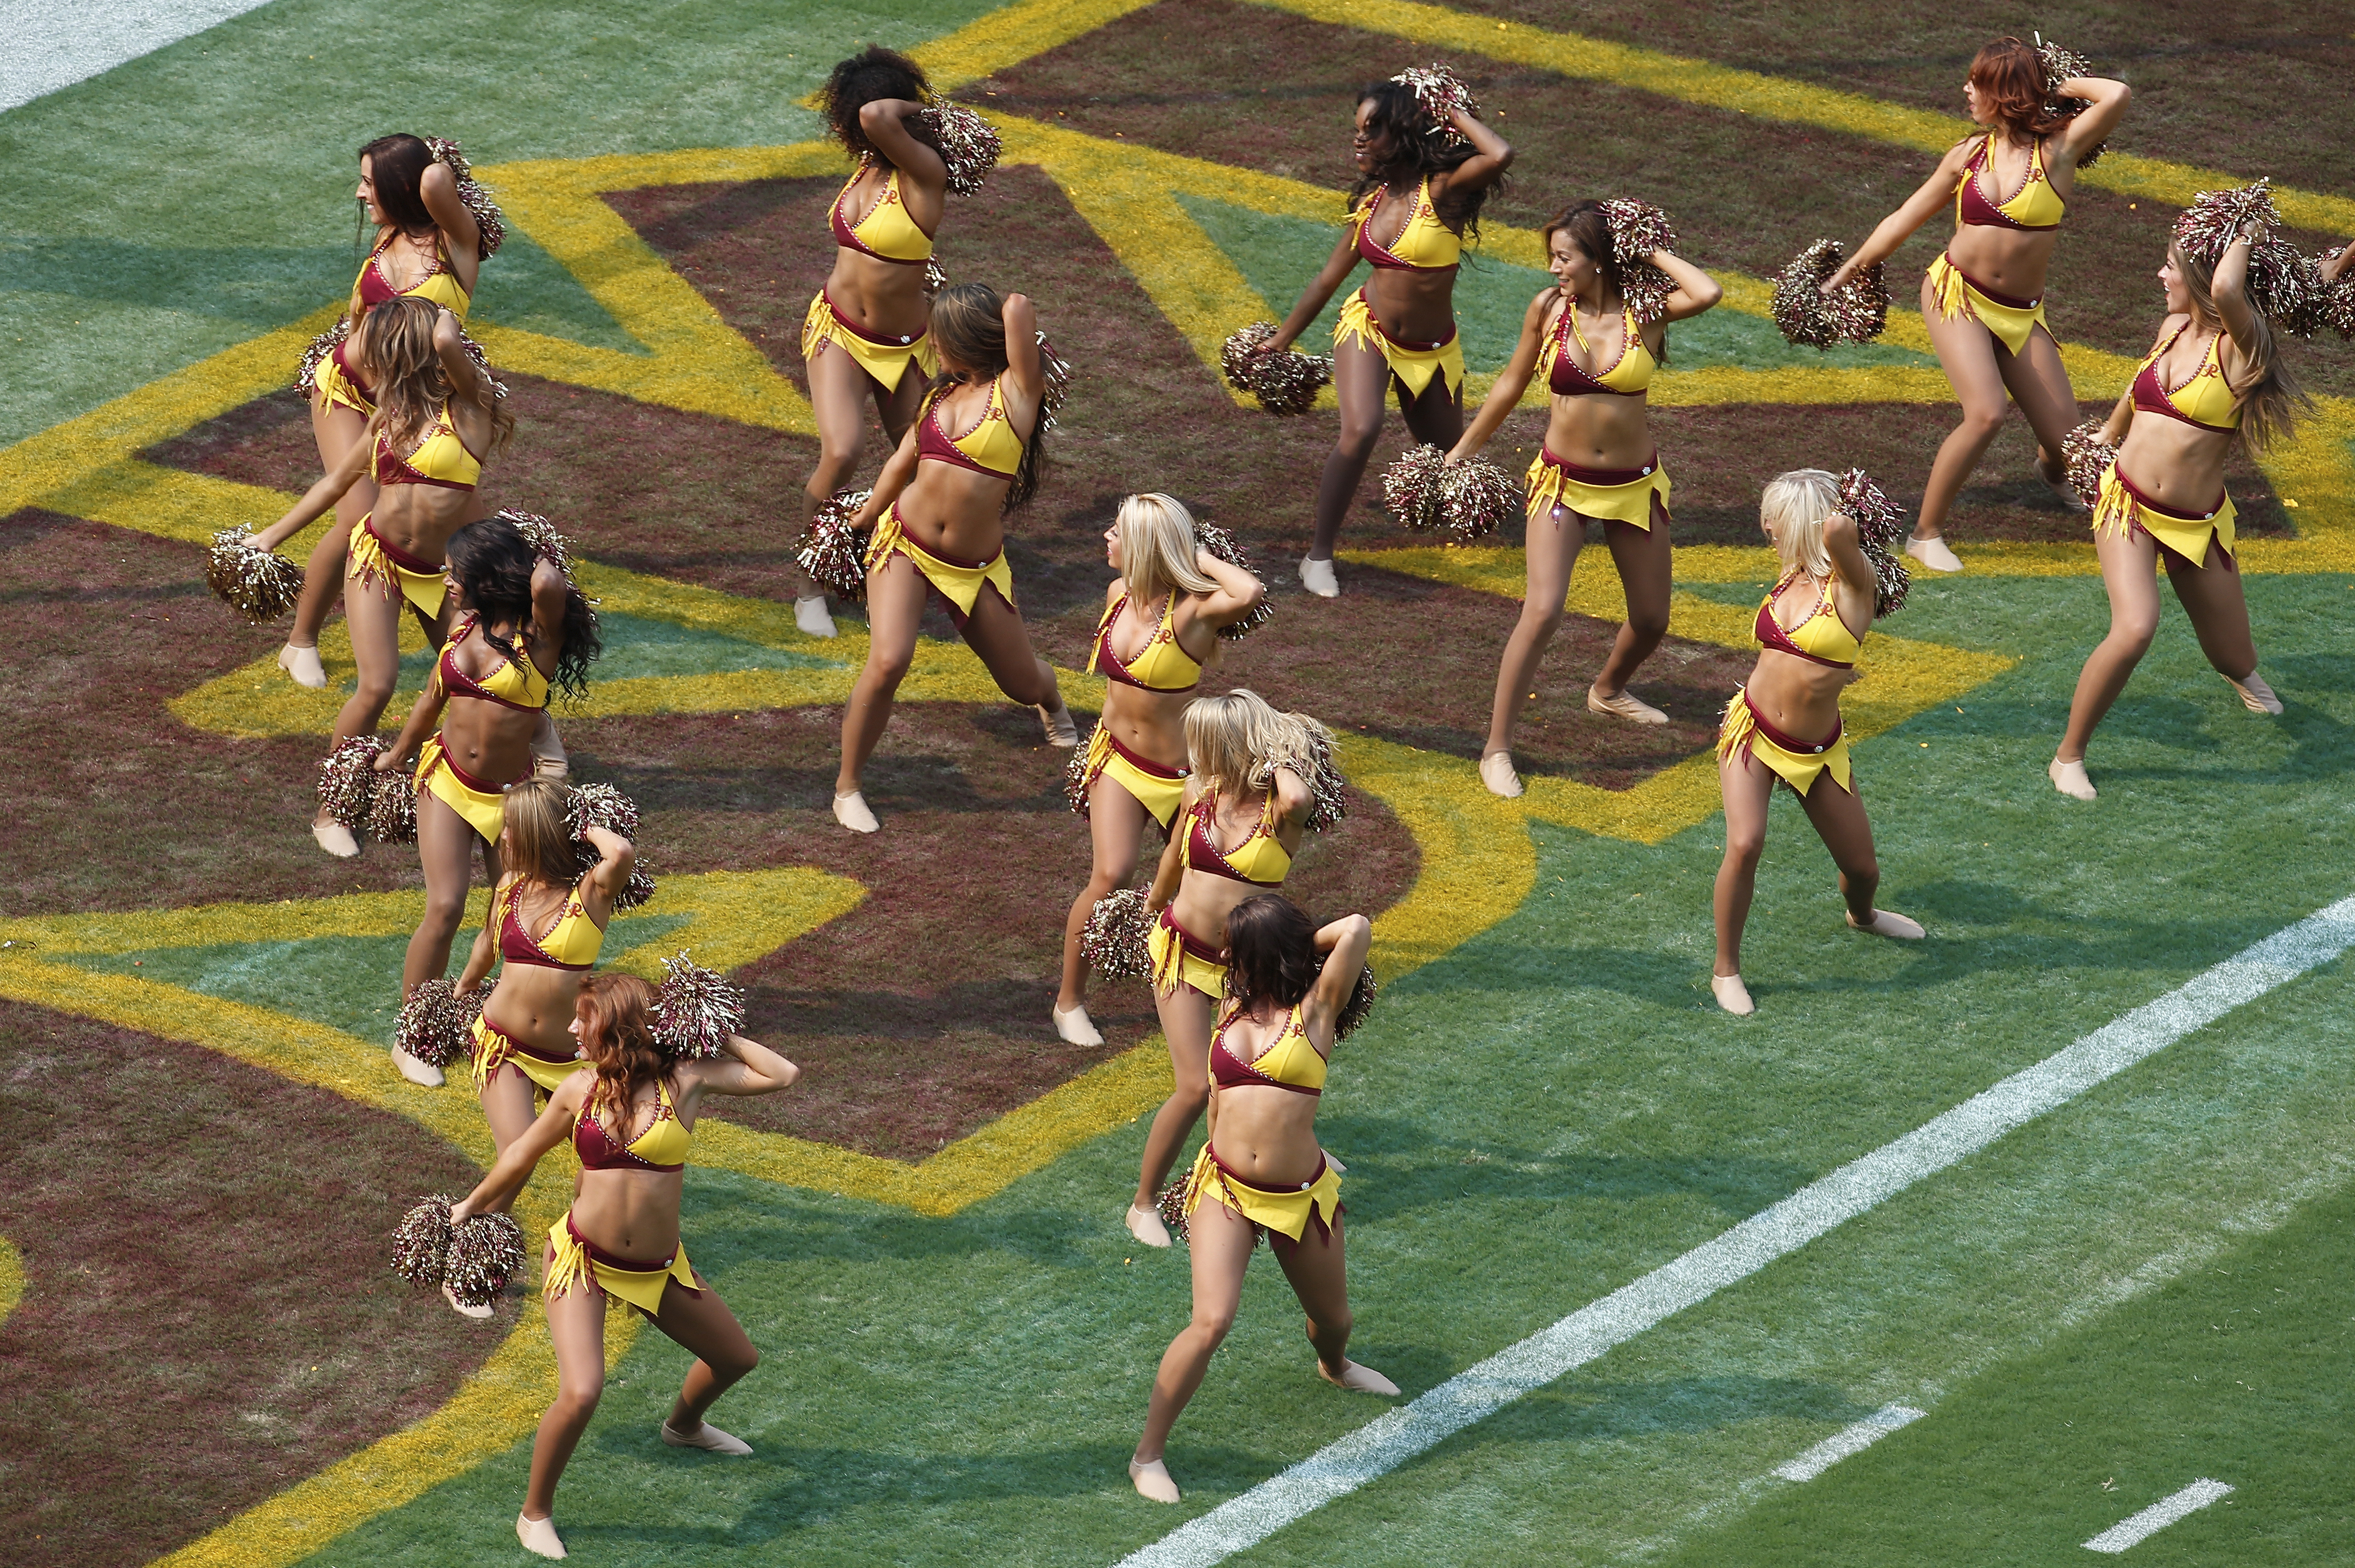 Washington's NFL Cheerleaders Say They Had To Pose Topless As VIPs Watched  – Houston Public Media